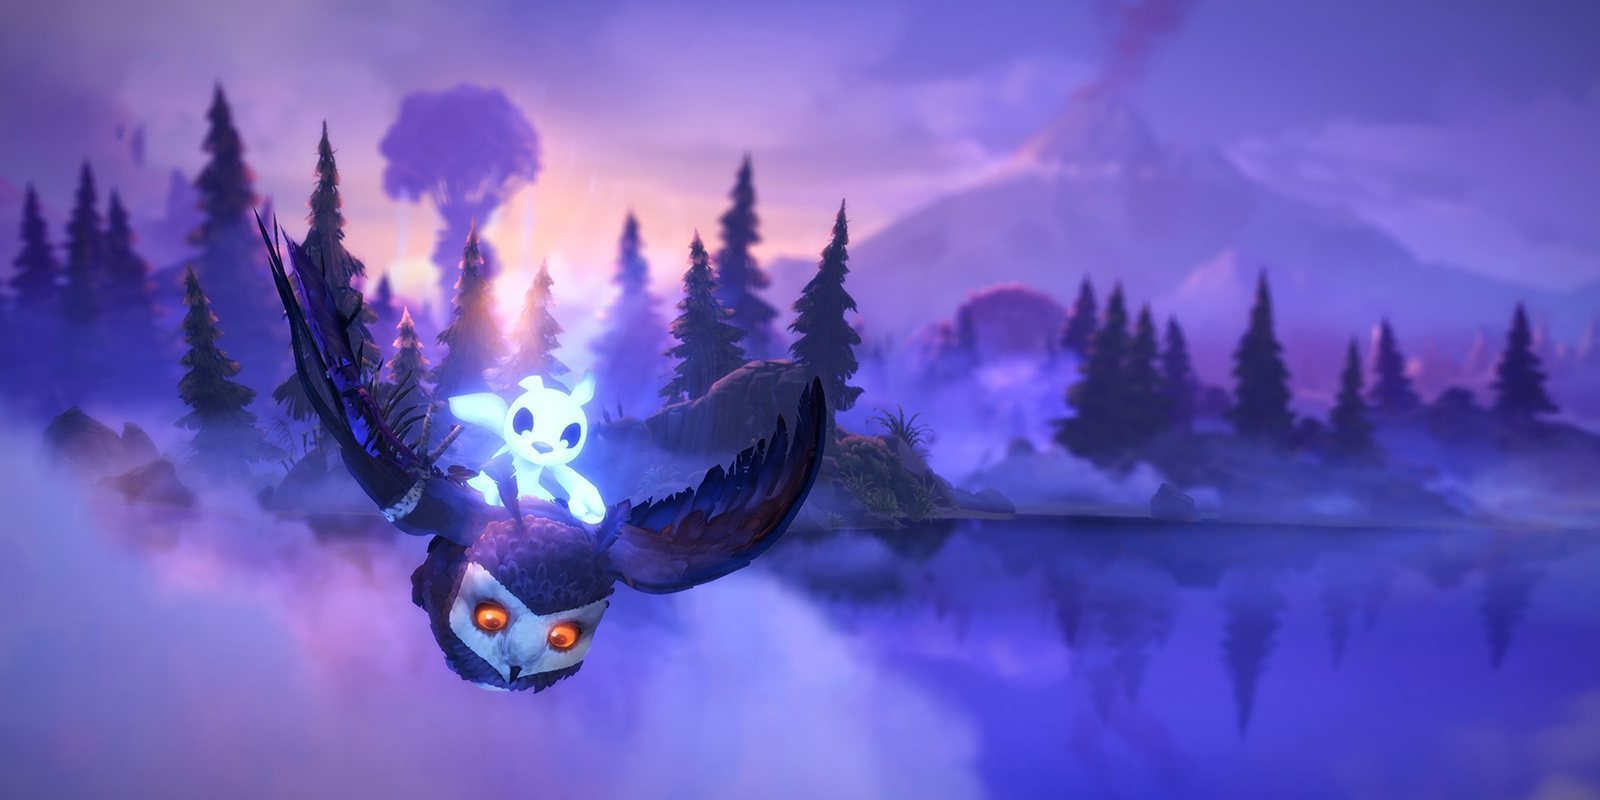 Análisis de 'Ori and the Will of the Wisps' para Xbox One, una aventura extrasensorial